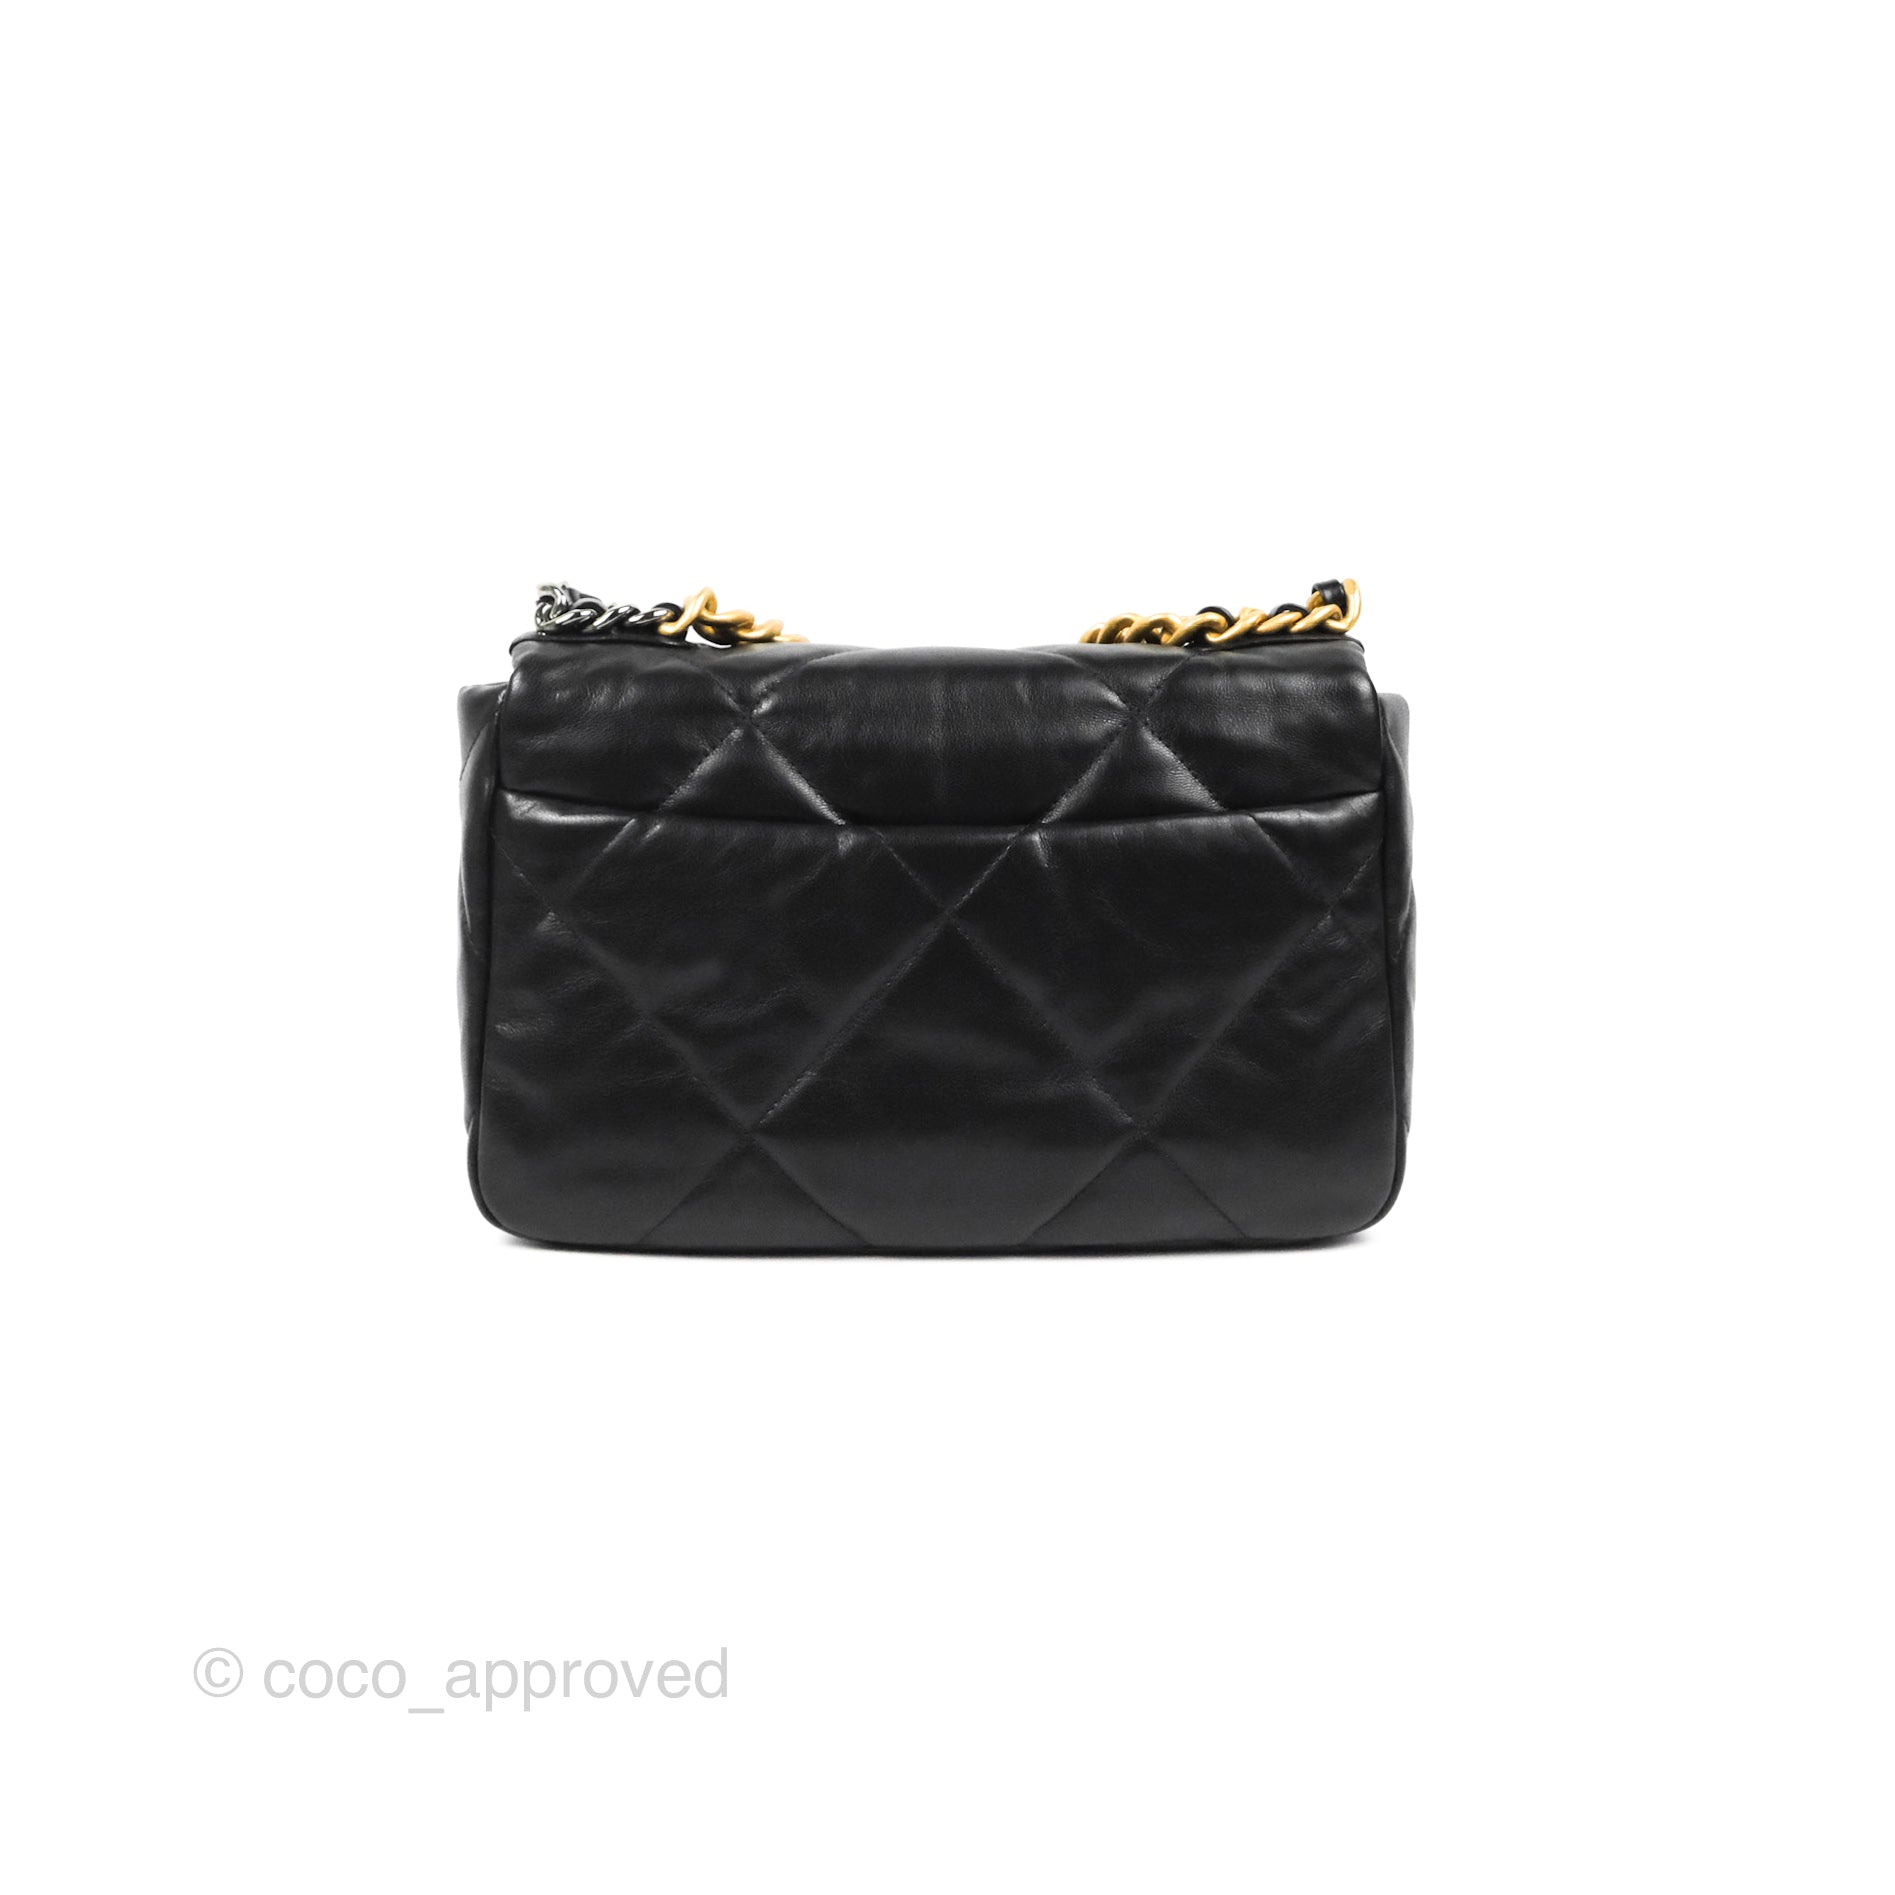 Sold at Auction: Chanel Black Quilted Goatskin and Patent Leather Hobo ' Gabrielle' Bag